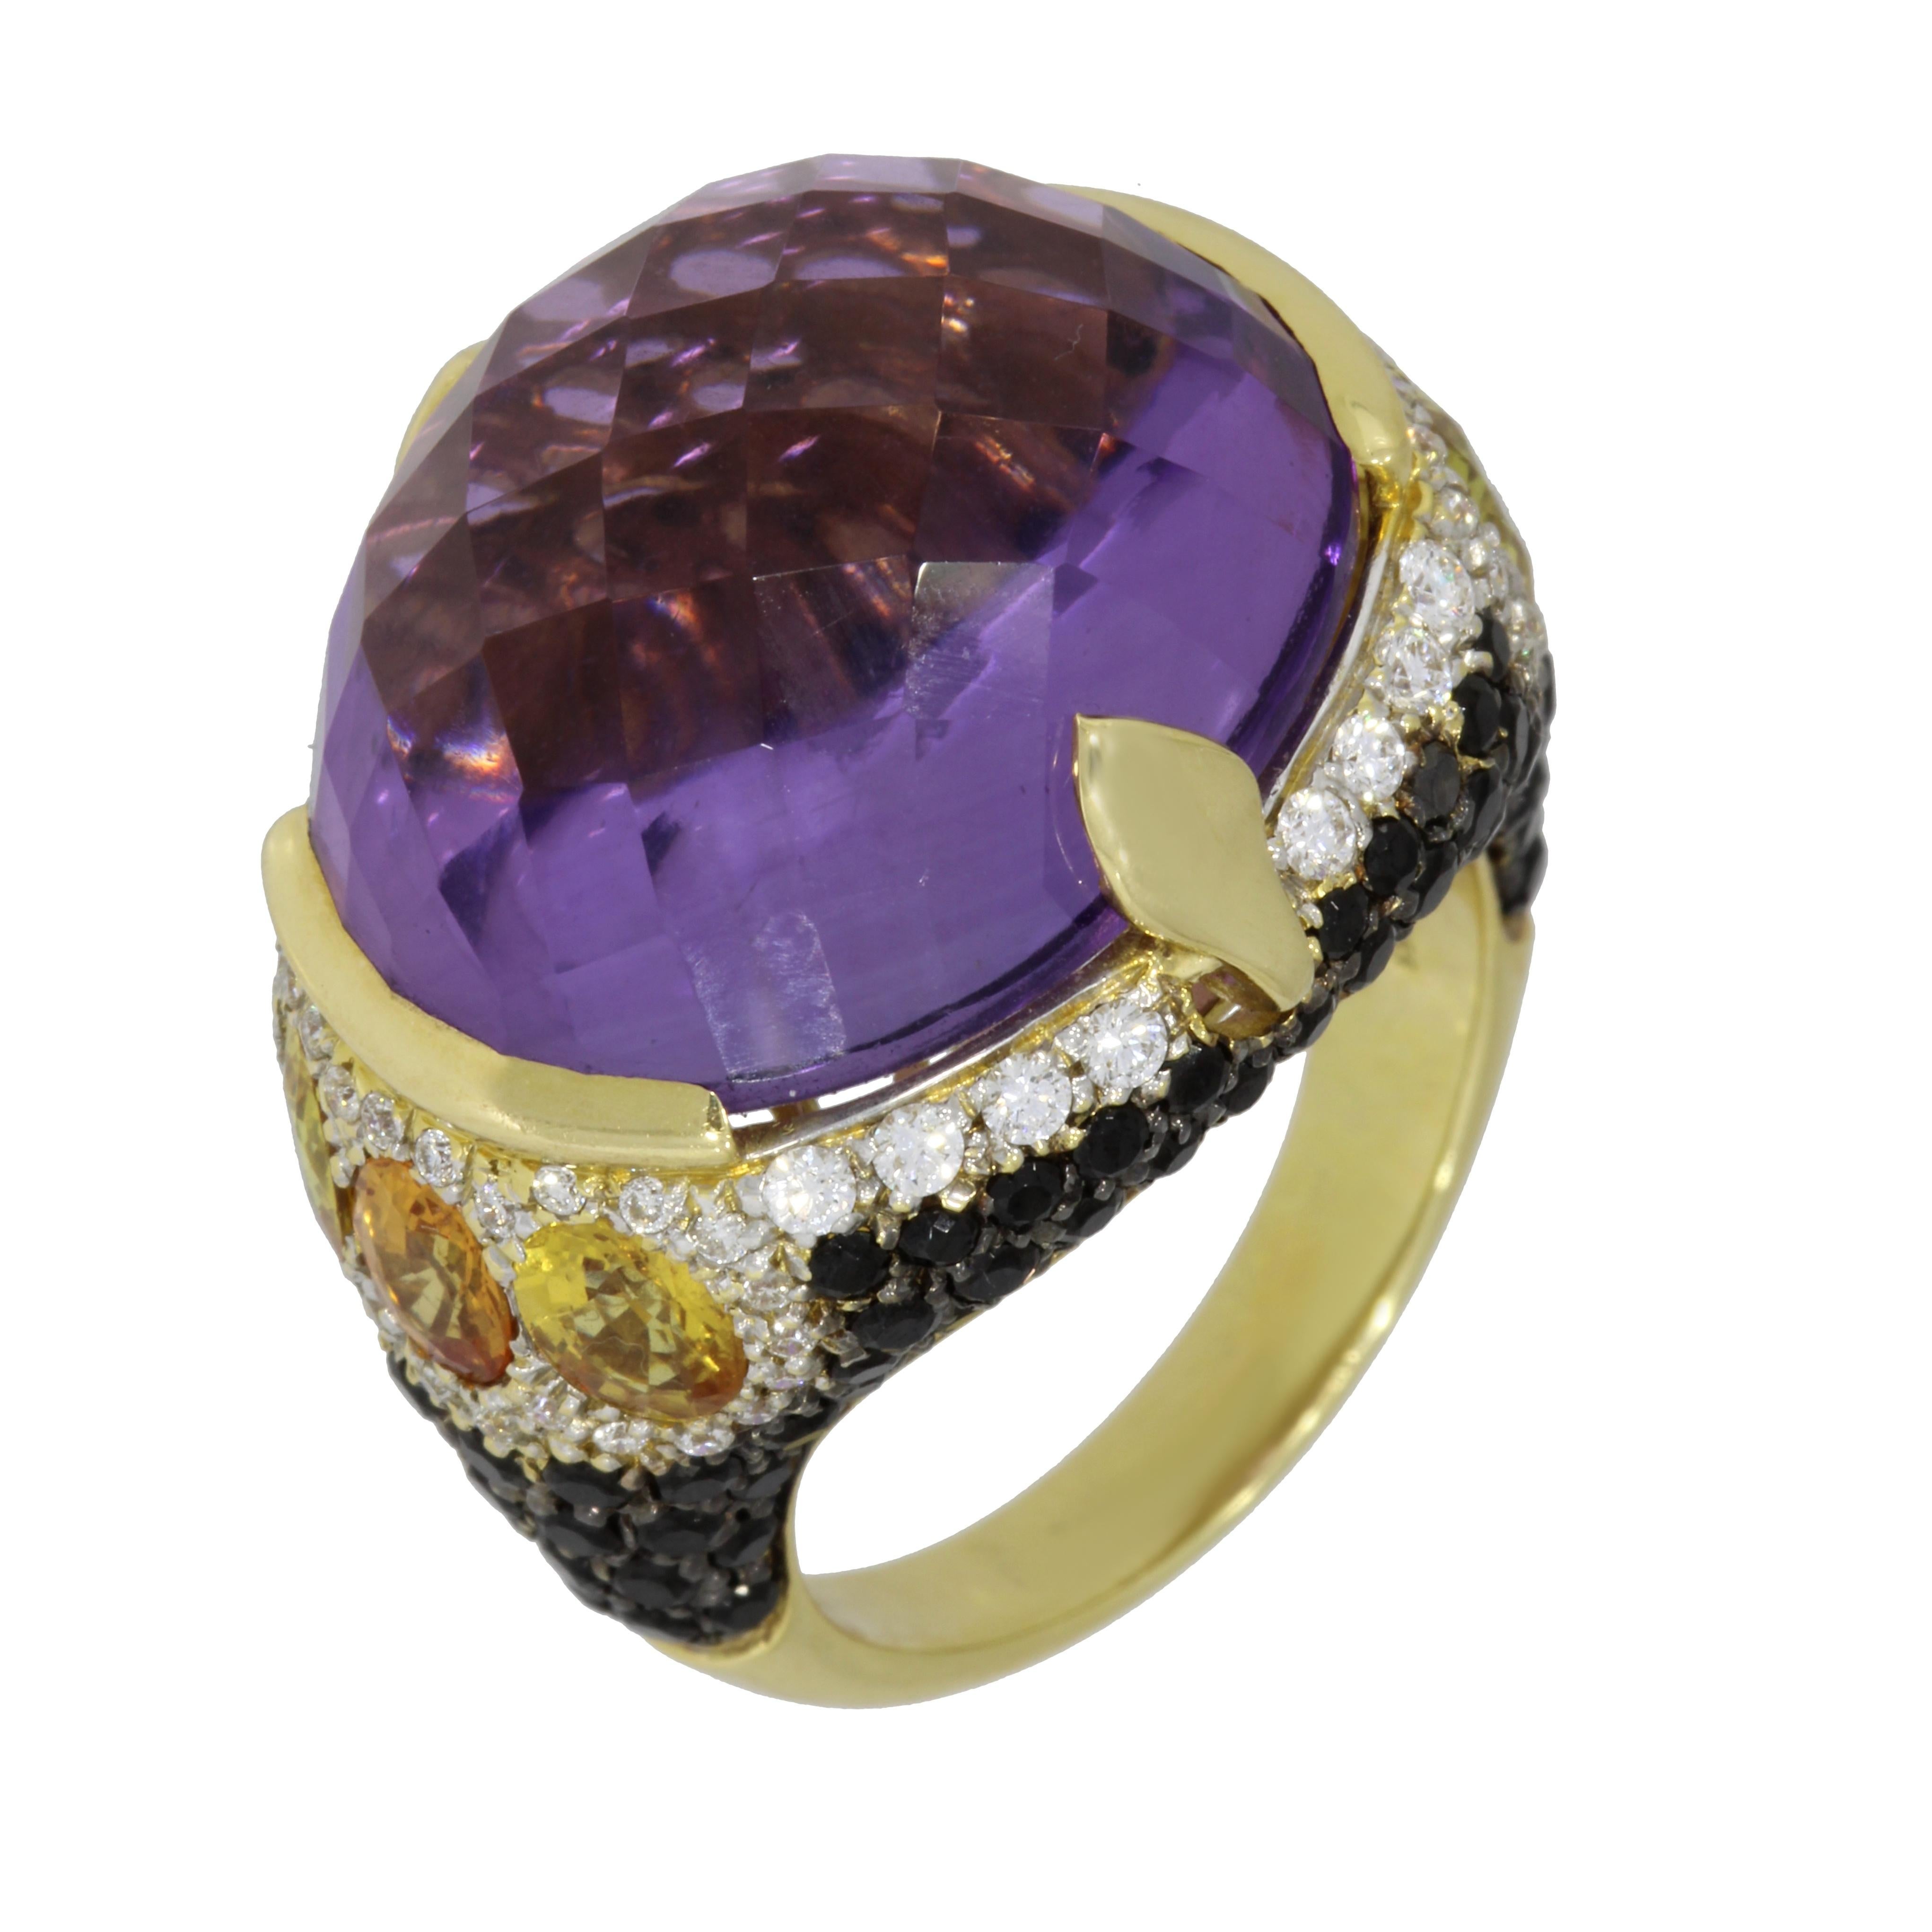 Contemporary 18 Karat Rose Gold Amethyst, Citrine and Diamond Venice Ring by Niquesa For Sale